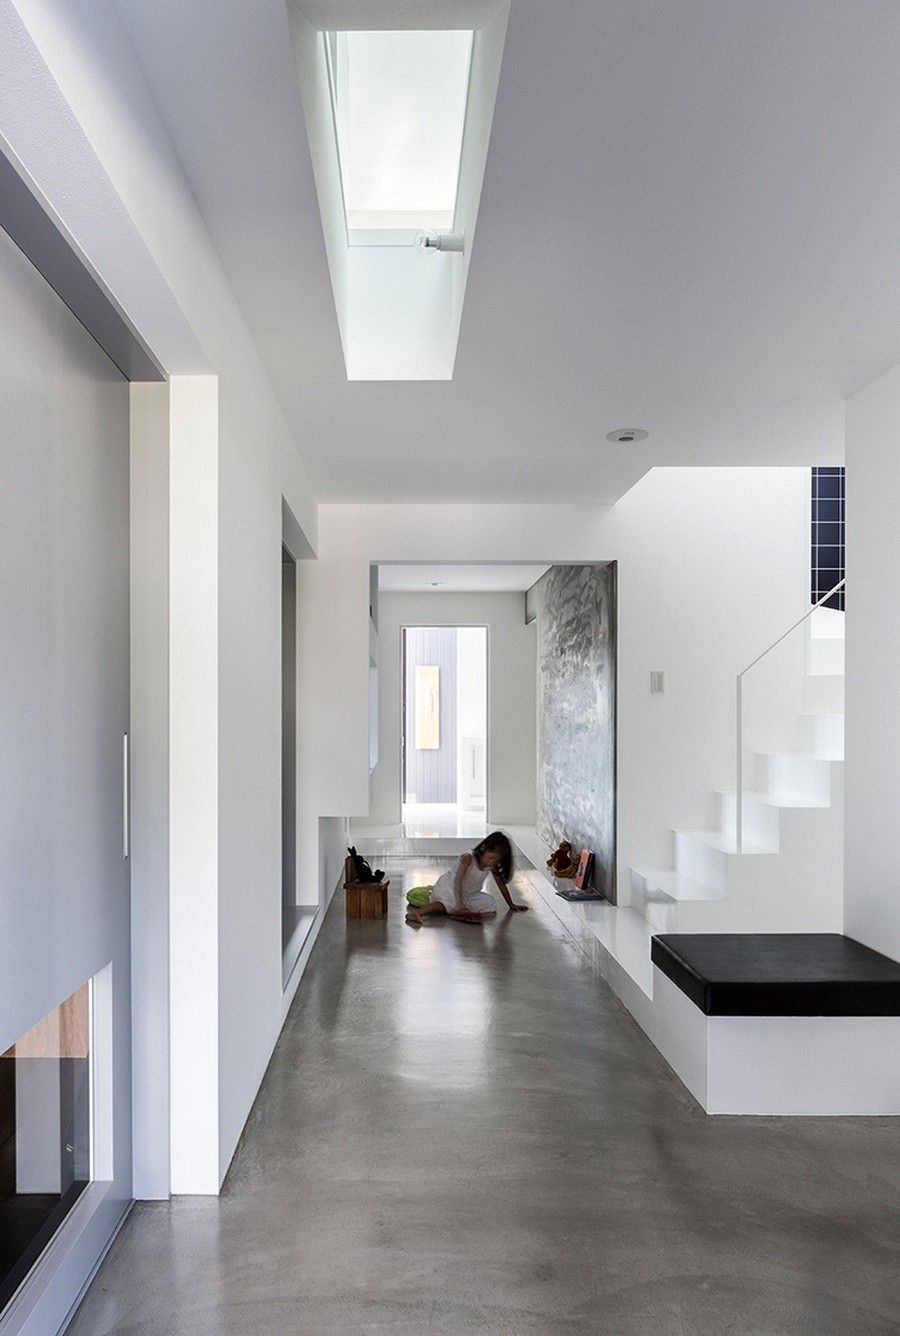 Japanese minimalism in the interior of the house scape house